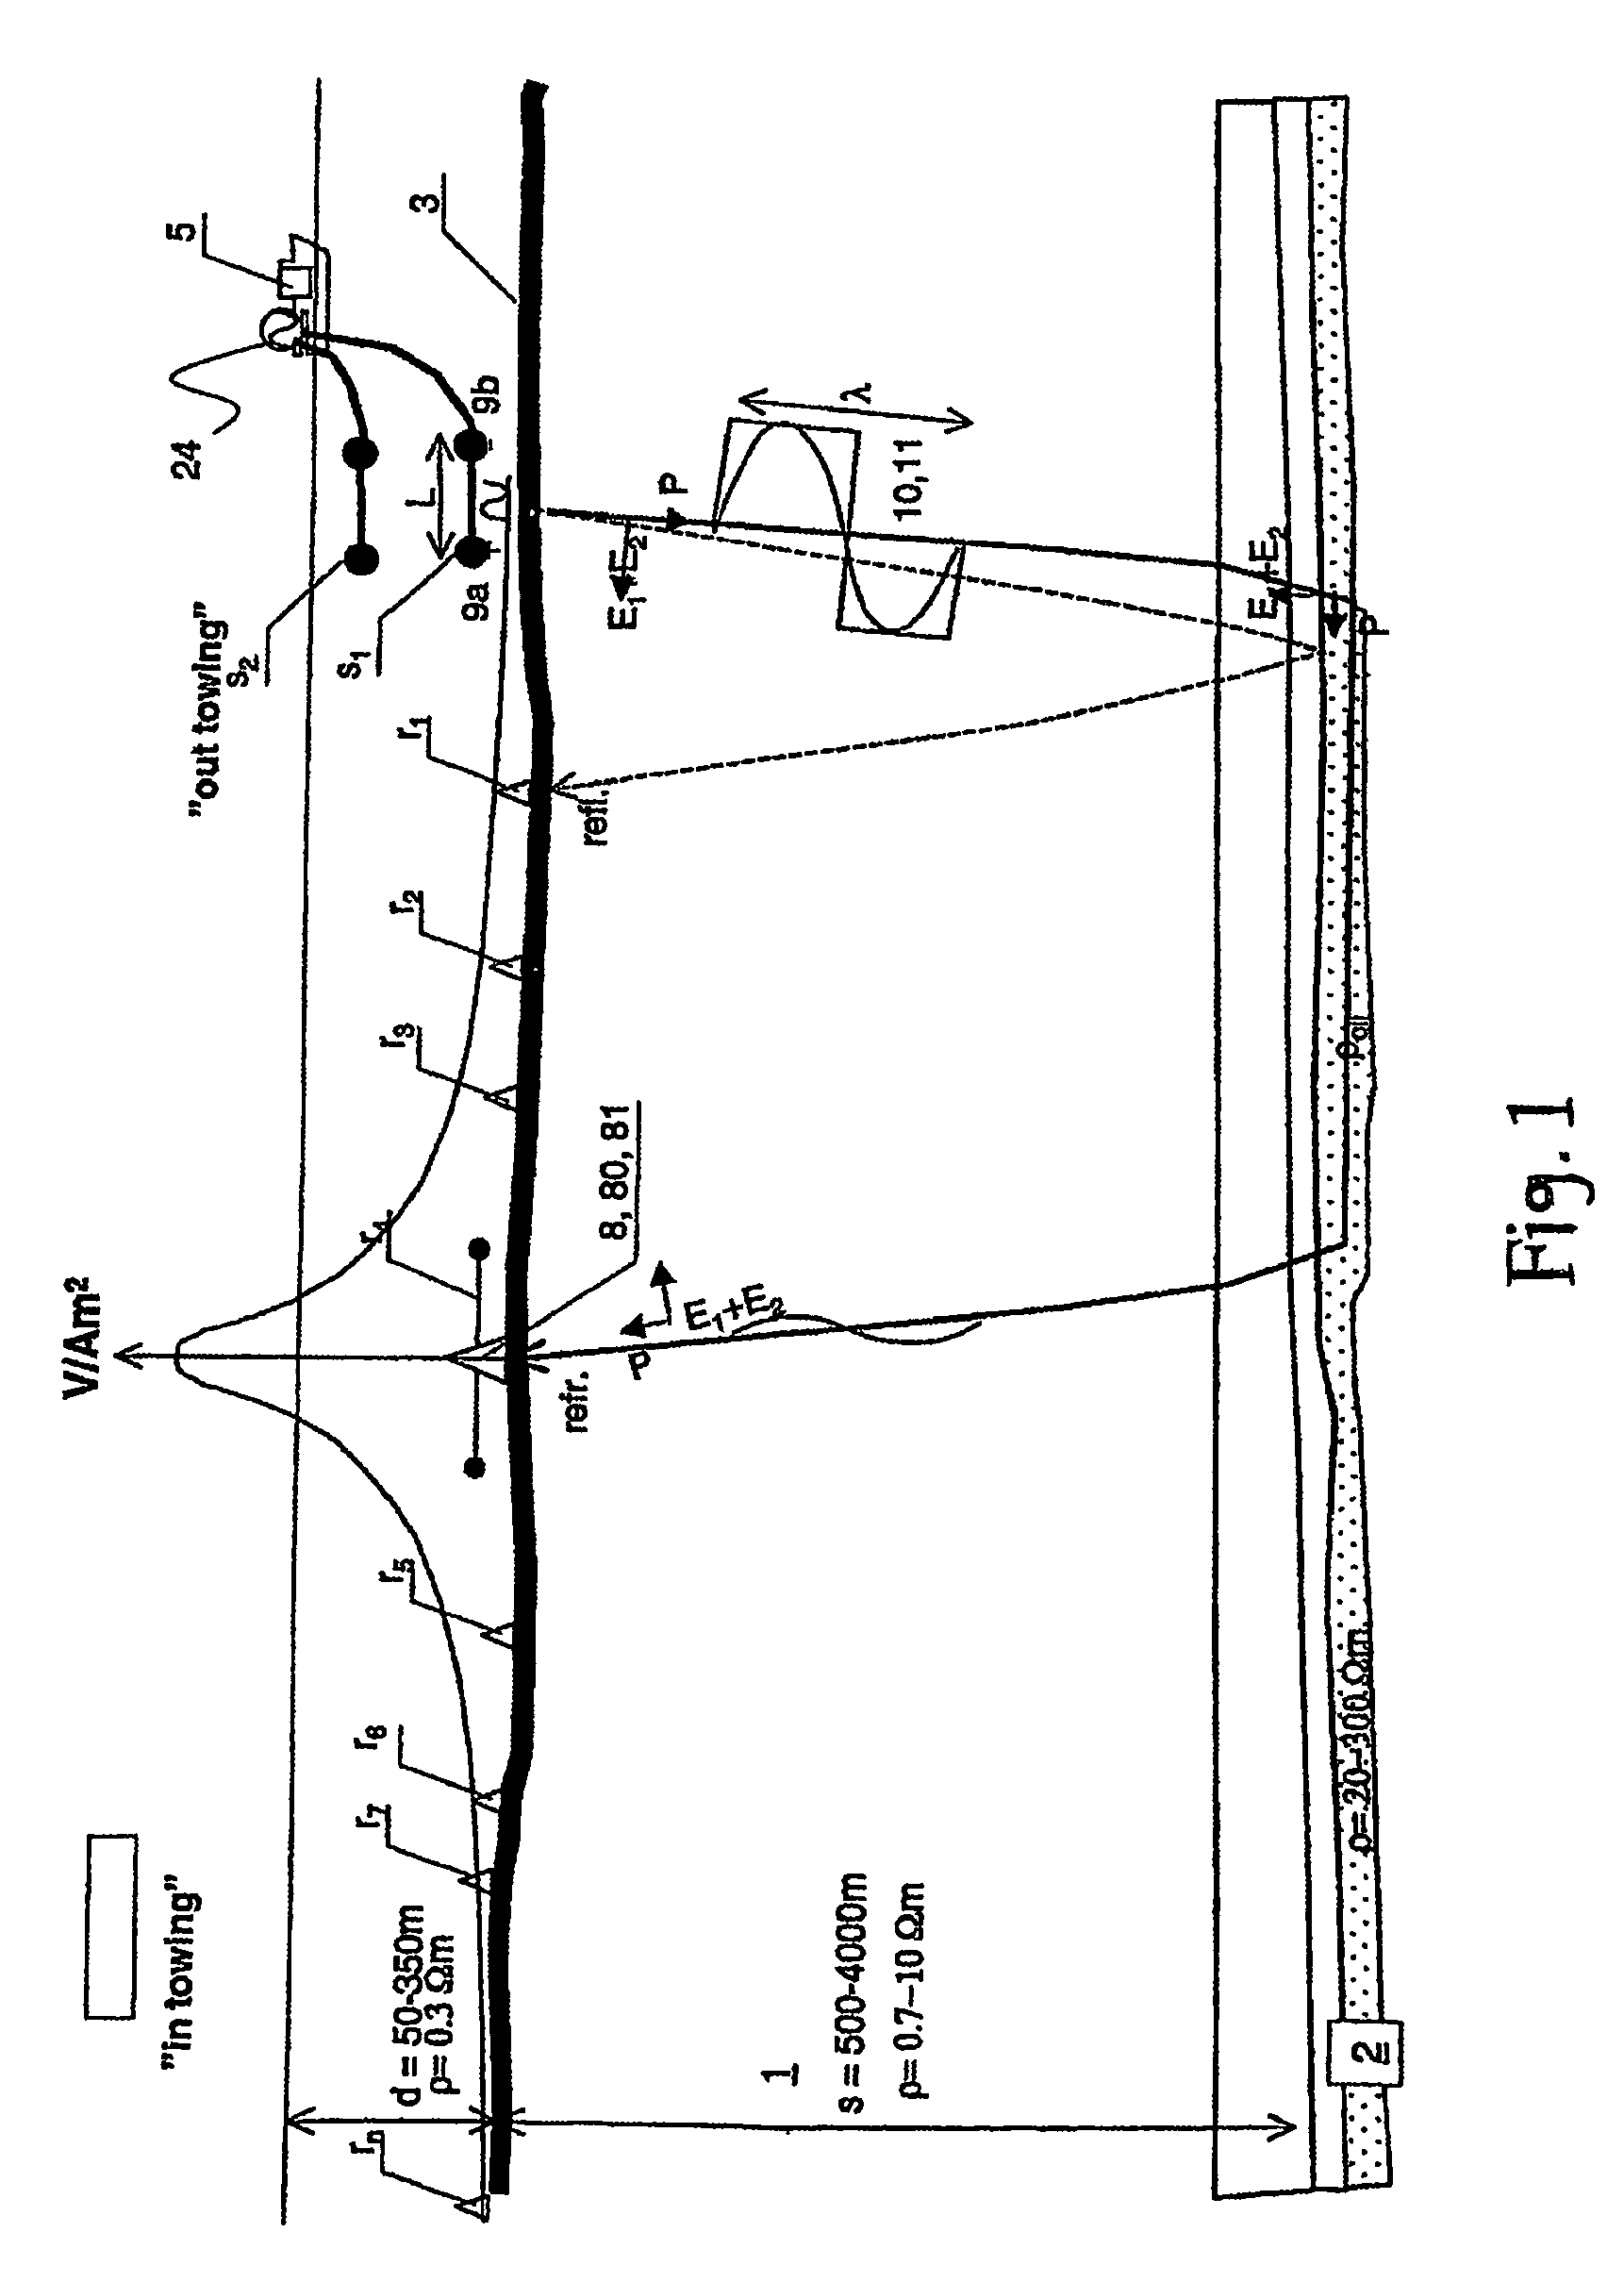 Method for electromagnetic geophysical surveying of subsea rock formations